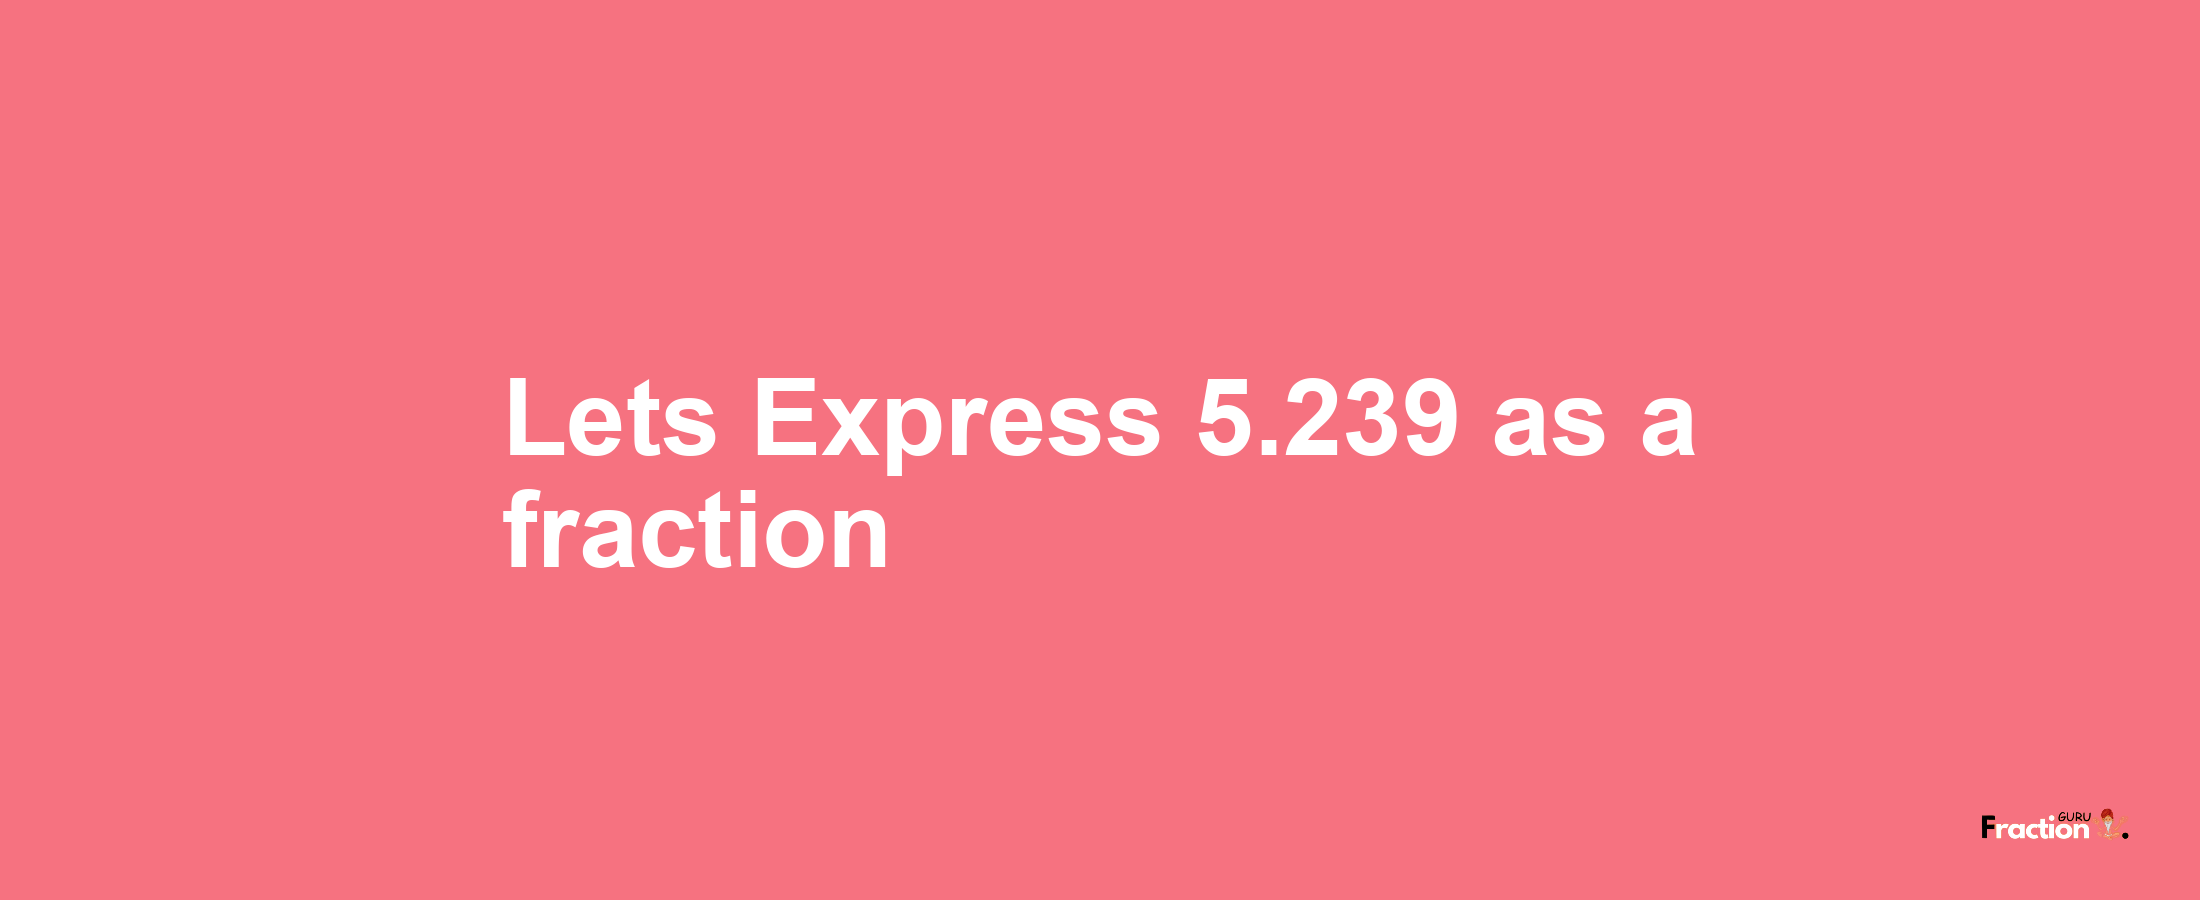 Lets Express 5.239 as afraction